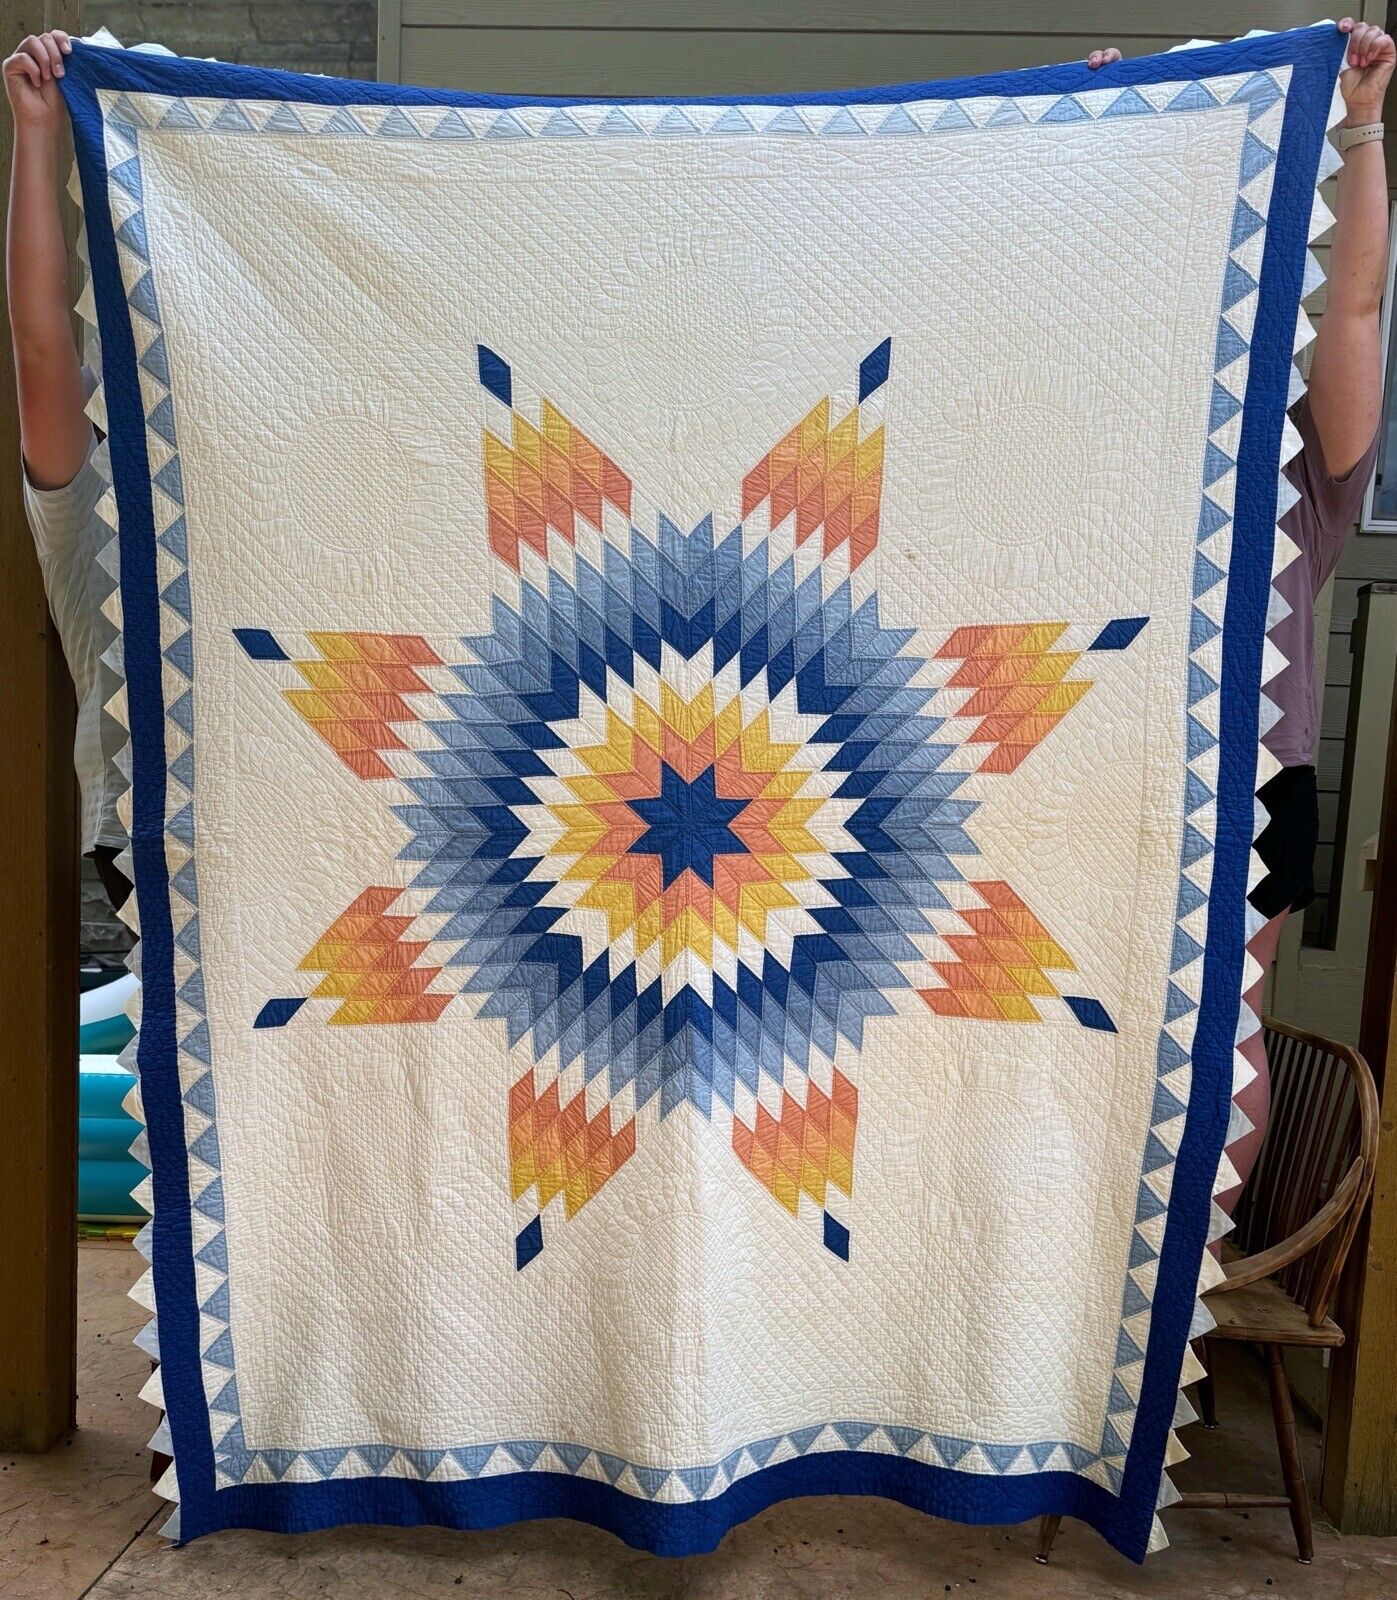 Expertly Hand Stitched Vintage Lone Star Quilt Blue Peach White Yellow 74